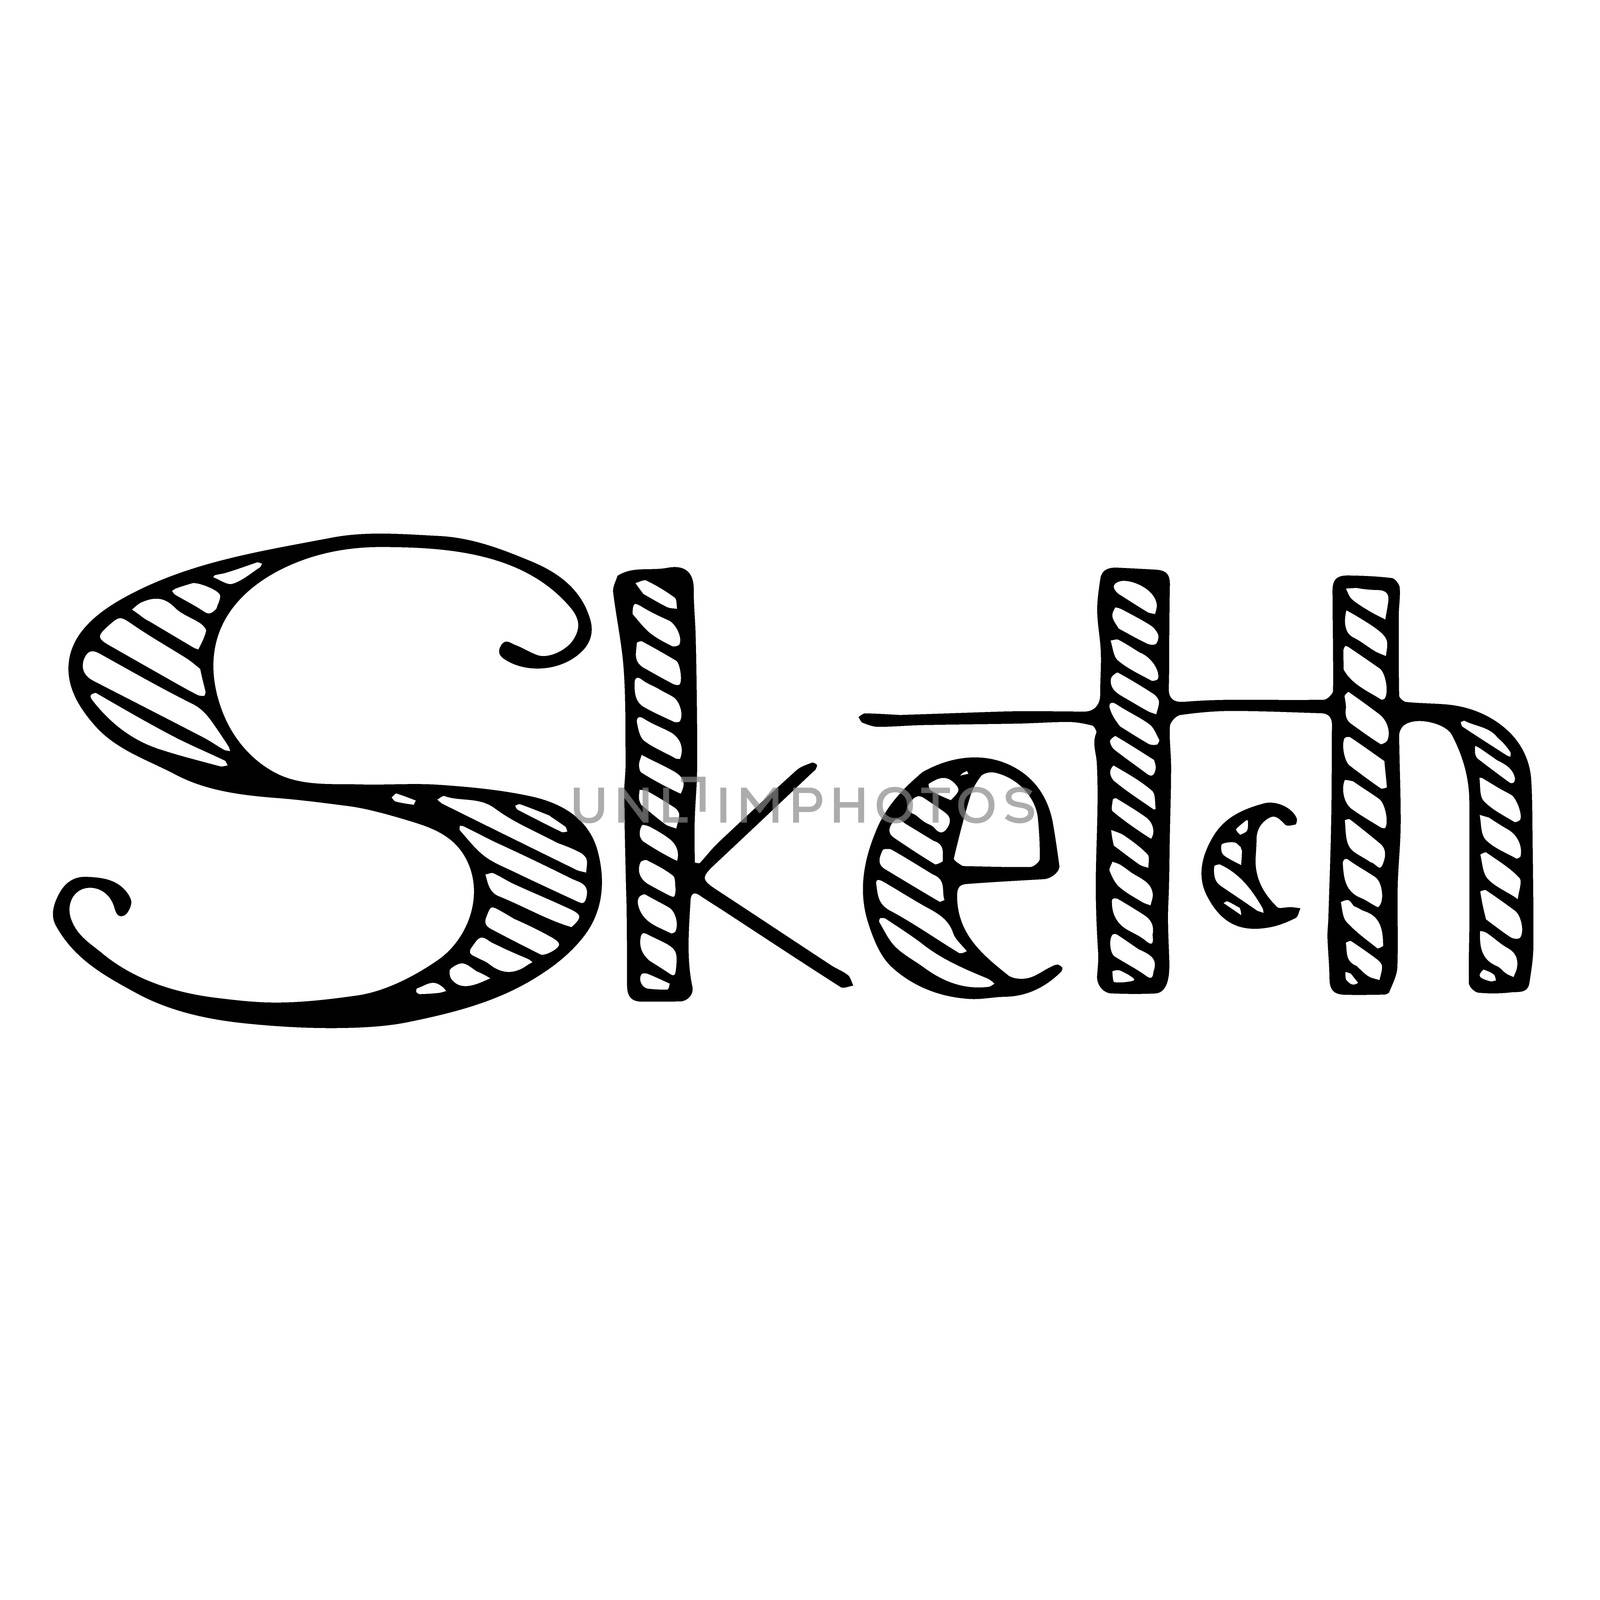 Sketch hand drawn phrase. Freehand drawn. Modern brush calligraphy. Isolated on white background. by VeekSegal